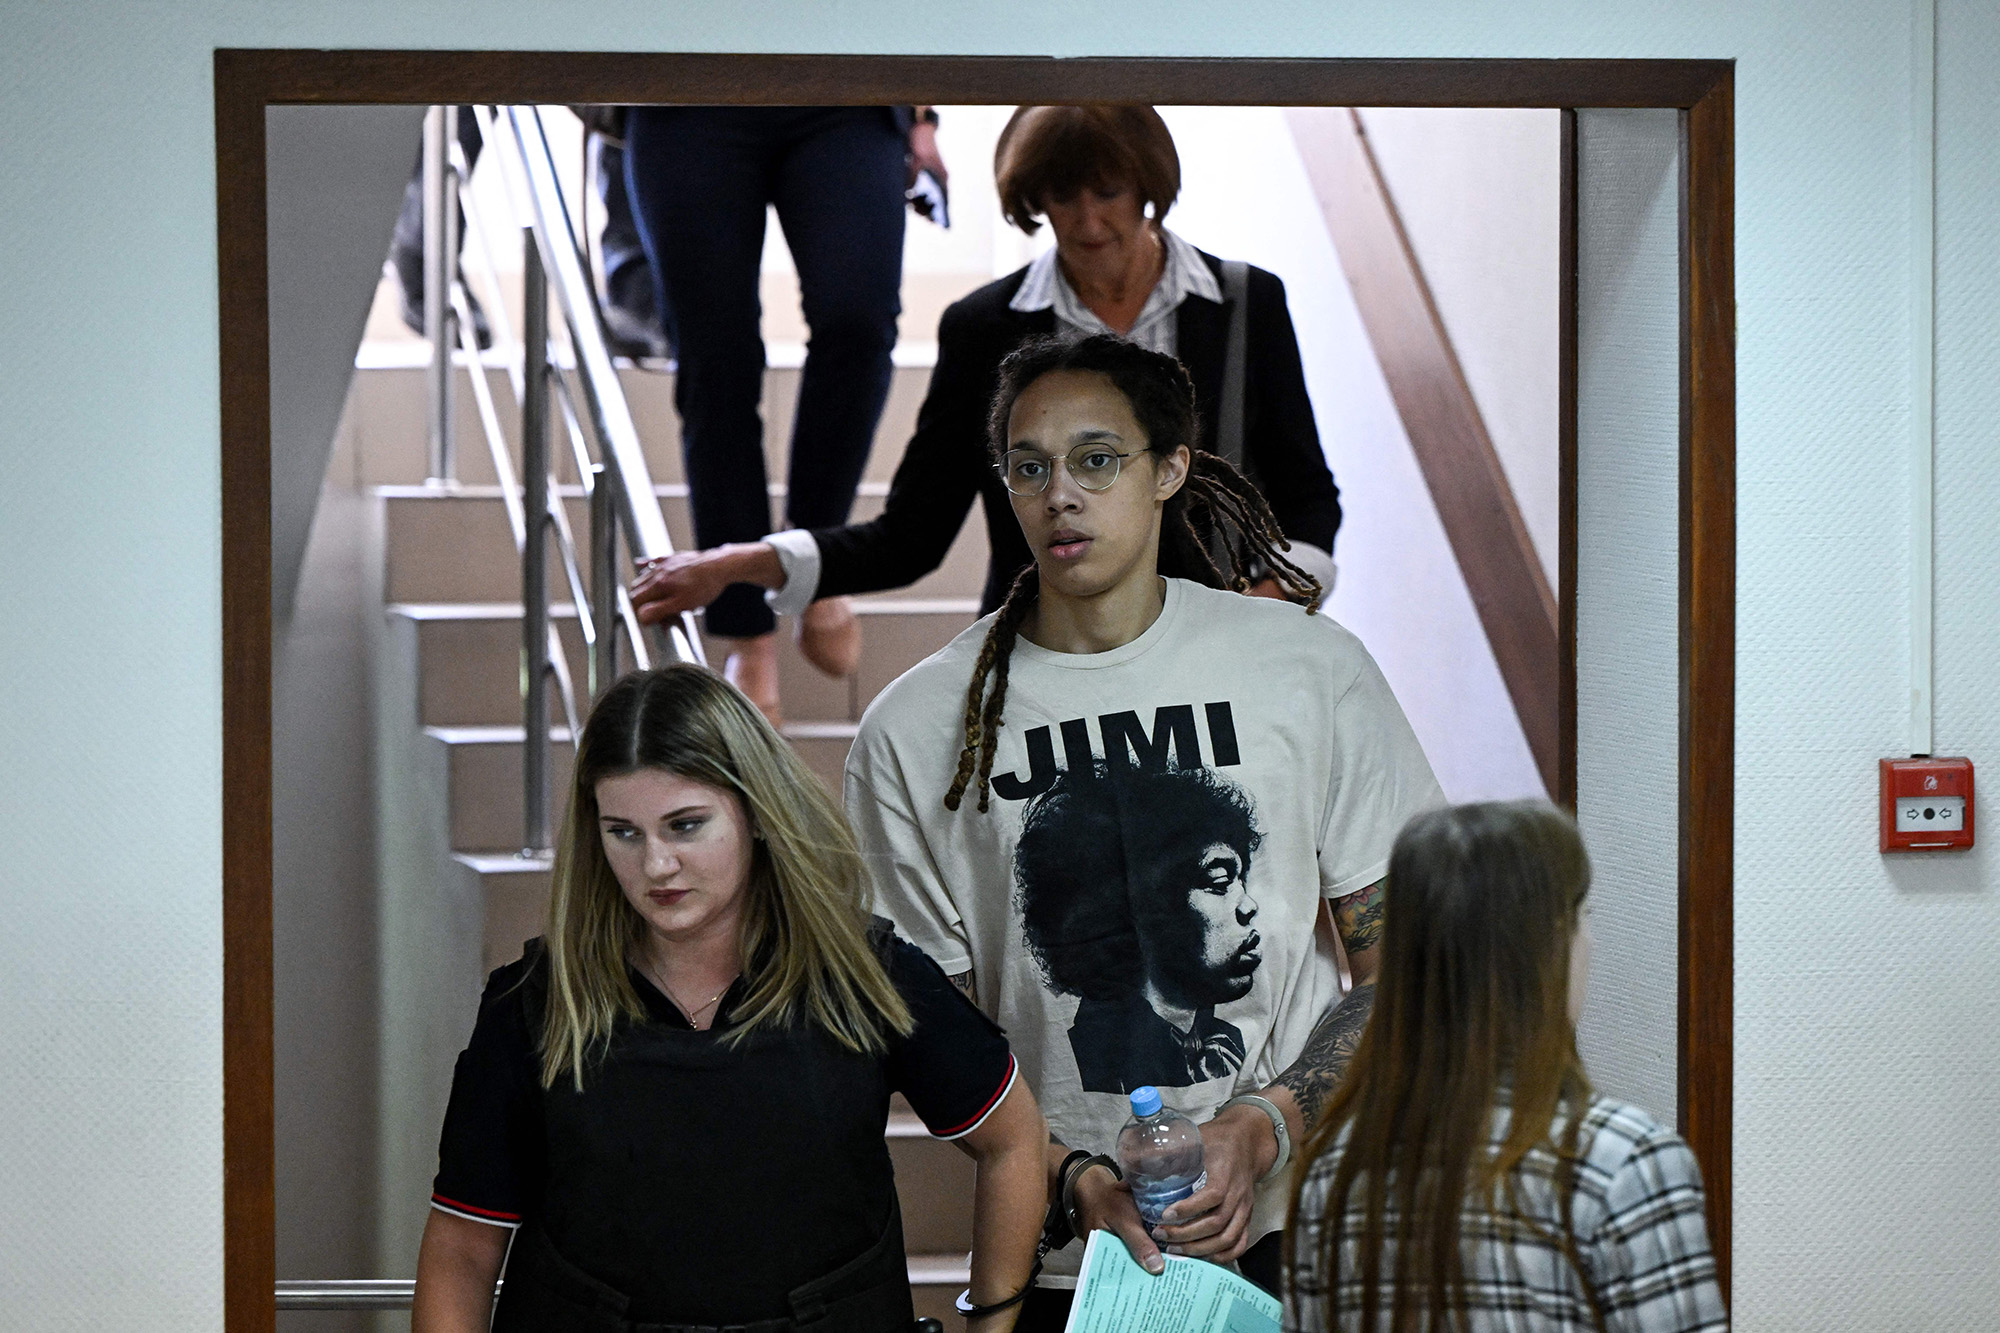 US WNBA basketball superstar Brittney Griner, center, arrives to a hearing at the Khimki Court, outside Moscow, Russia, on July 1.